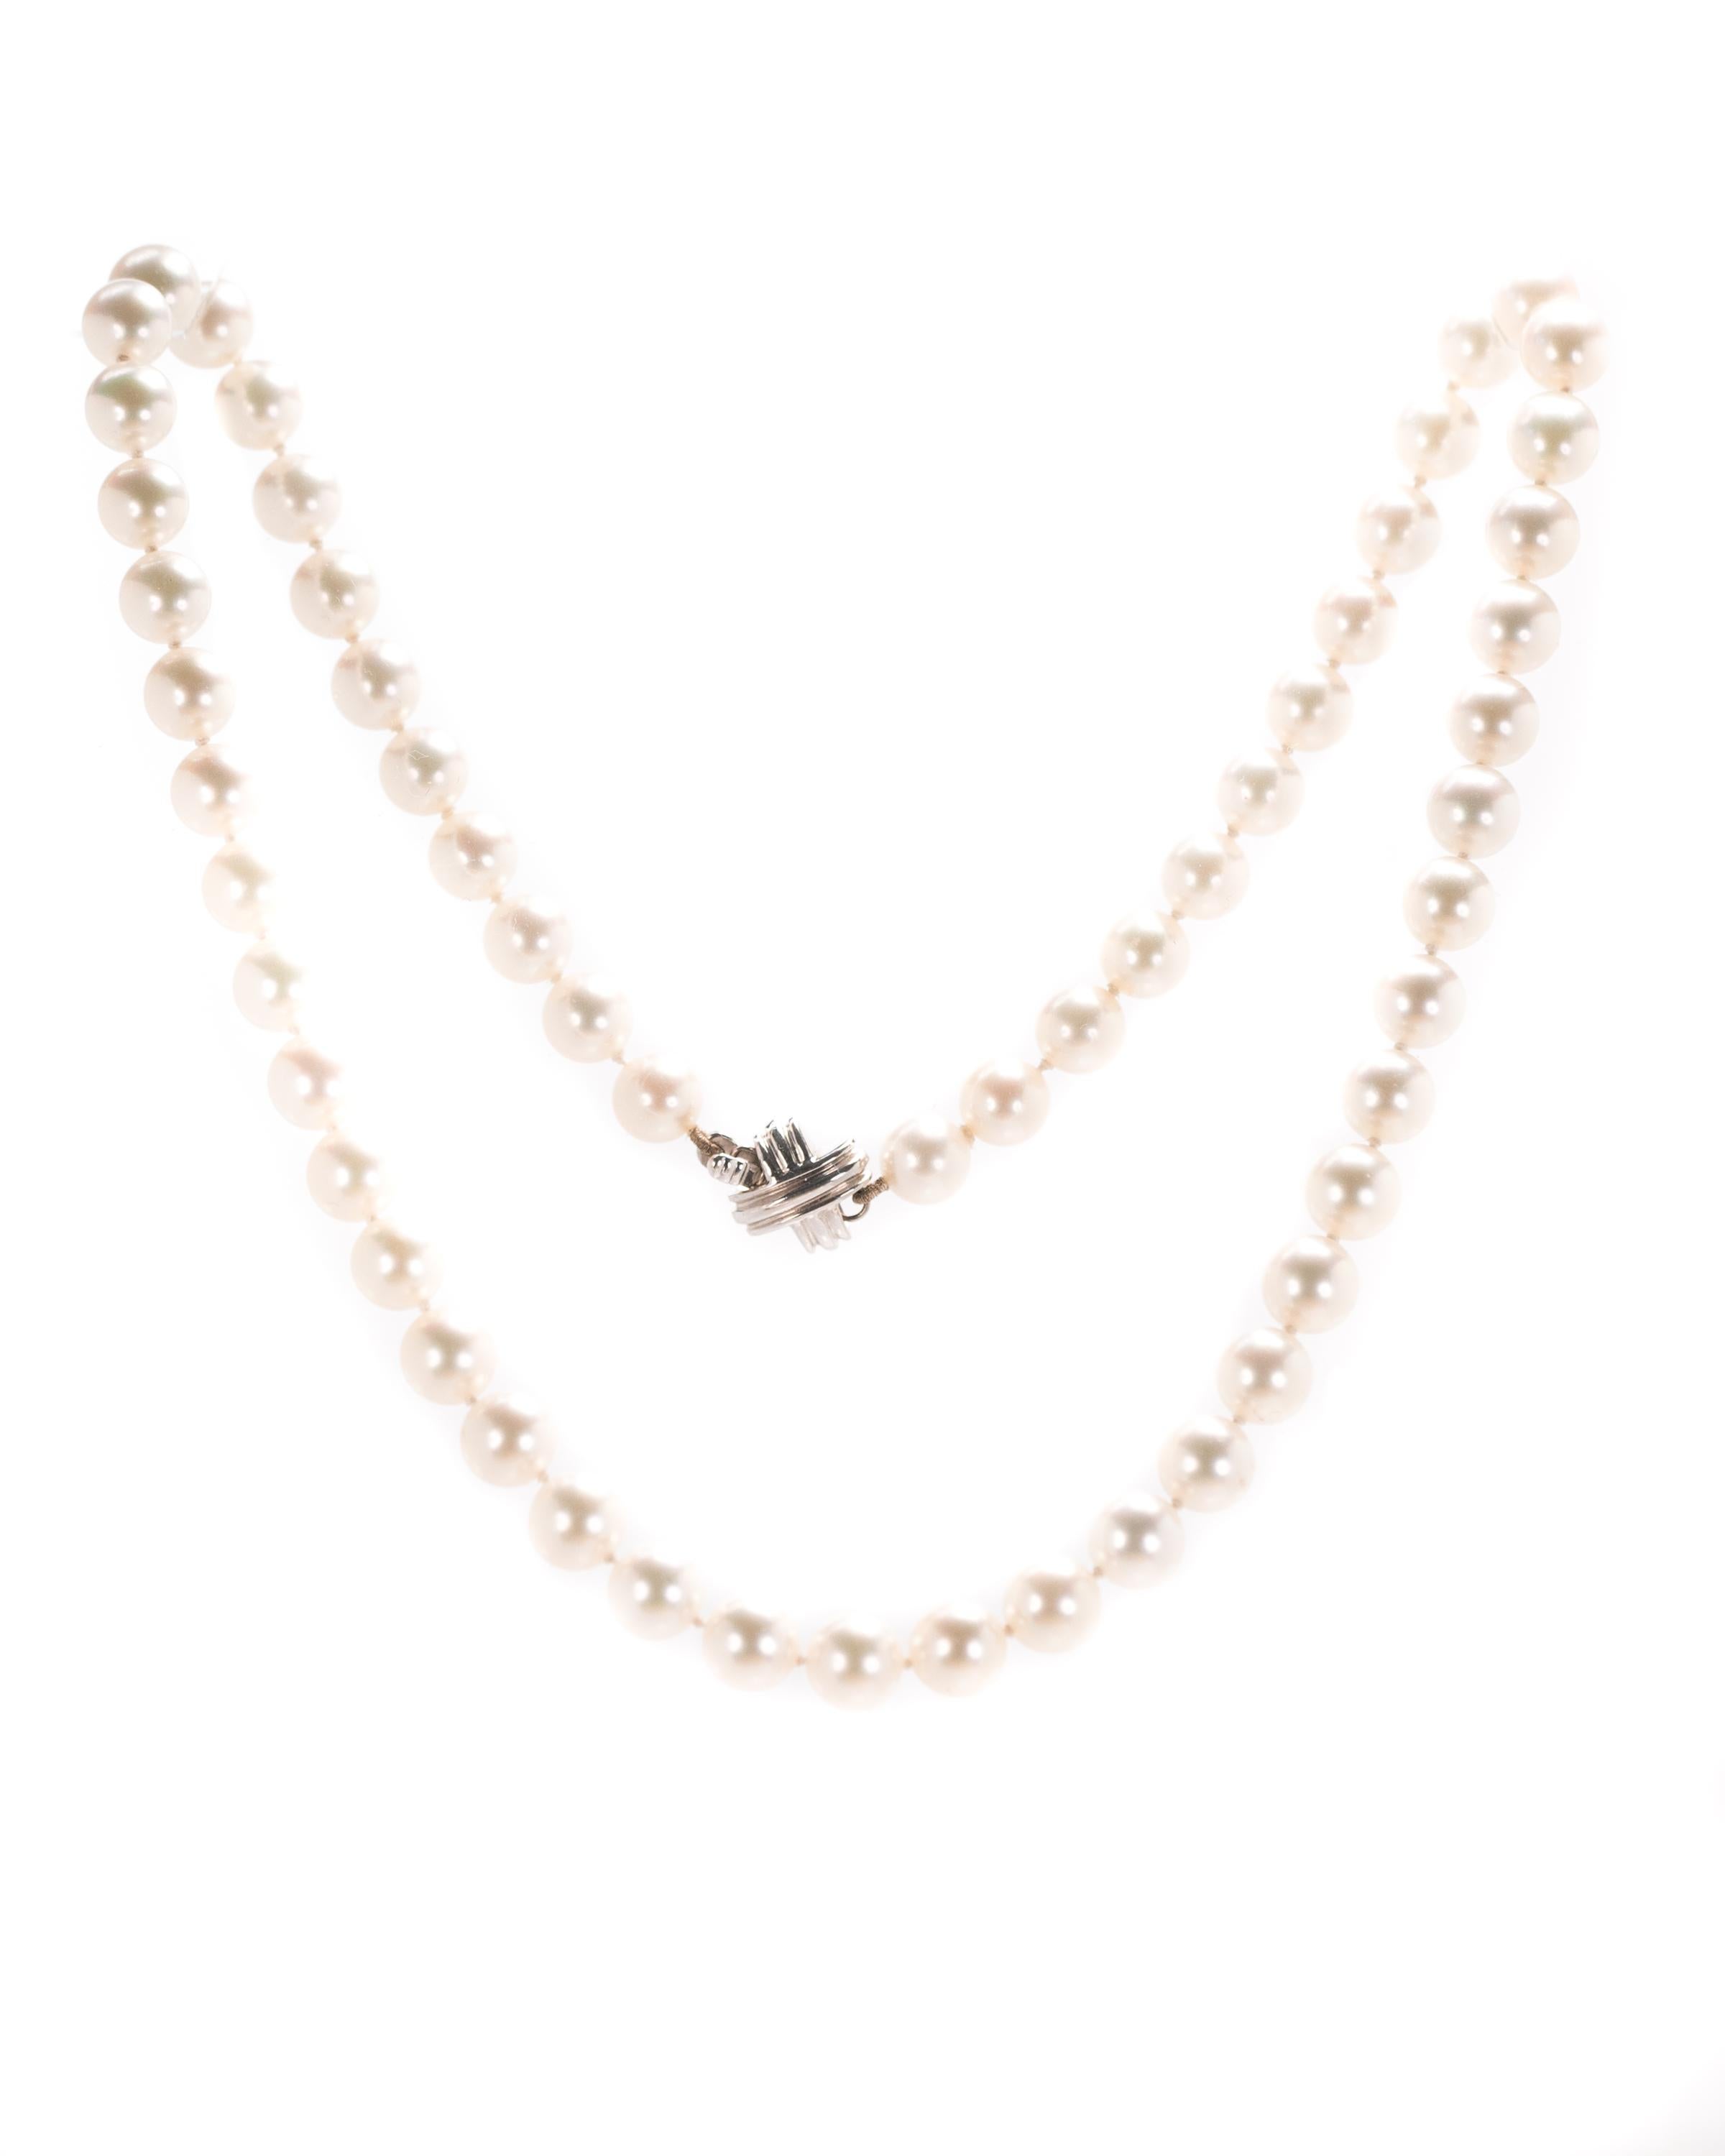 Tiffany and Co. Akoya Pearl Necklace - 18 Karat White Gold, Akoya cultured Pearls

Features:
16 inch long single strand necklace
7 millimeter white Akoya cultured Pearls
18 Karat White Gold double sided fish hook clasp
18 Karat White Gold decorative